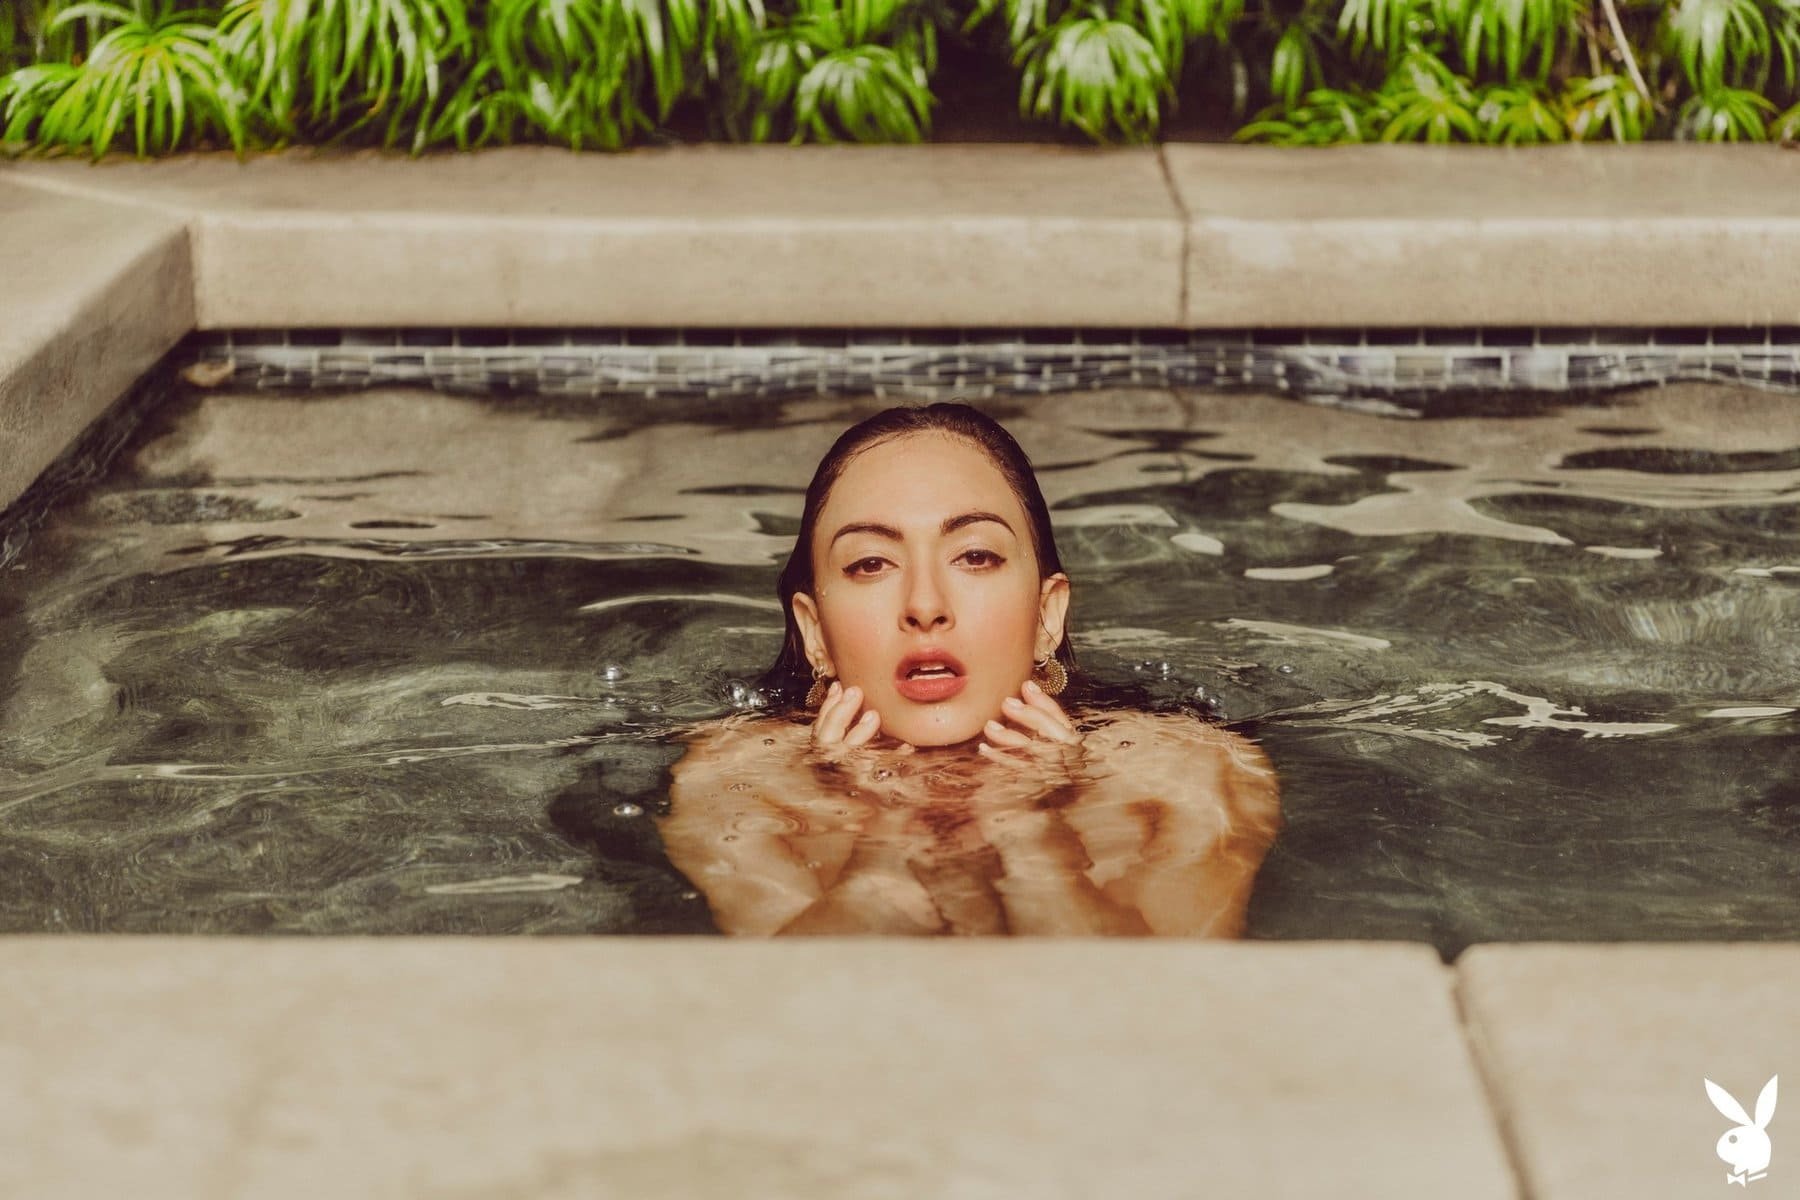 Genevieve Liberte dips her perfect natural figure in the pool